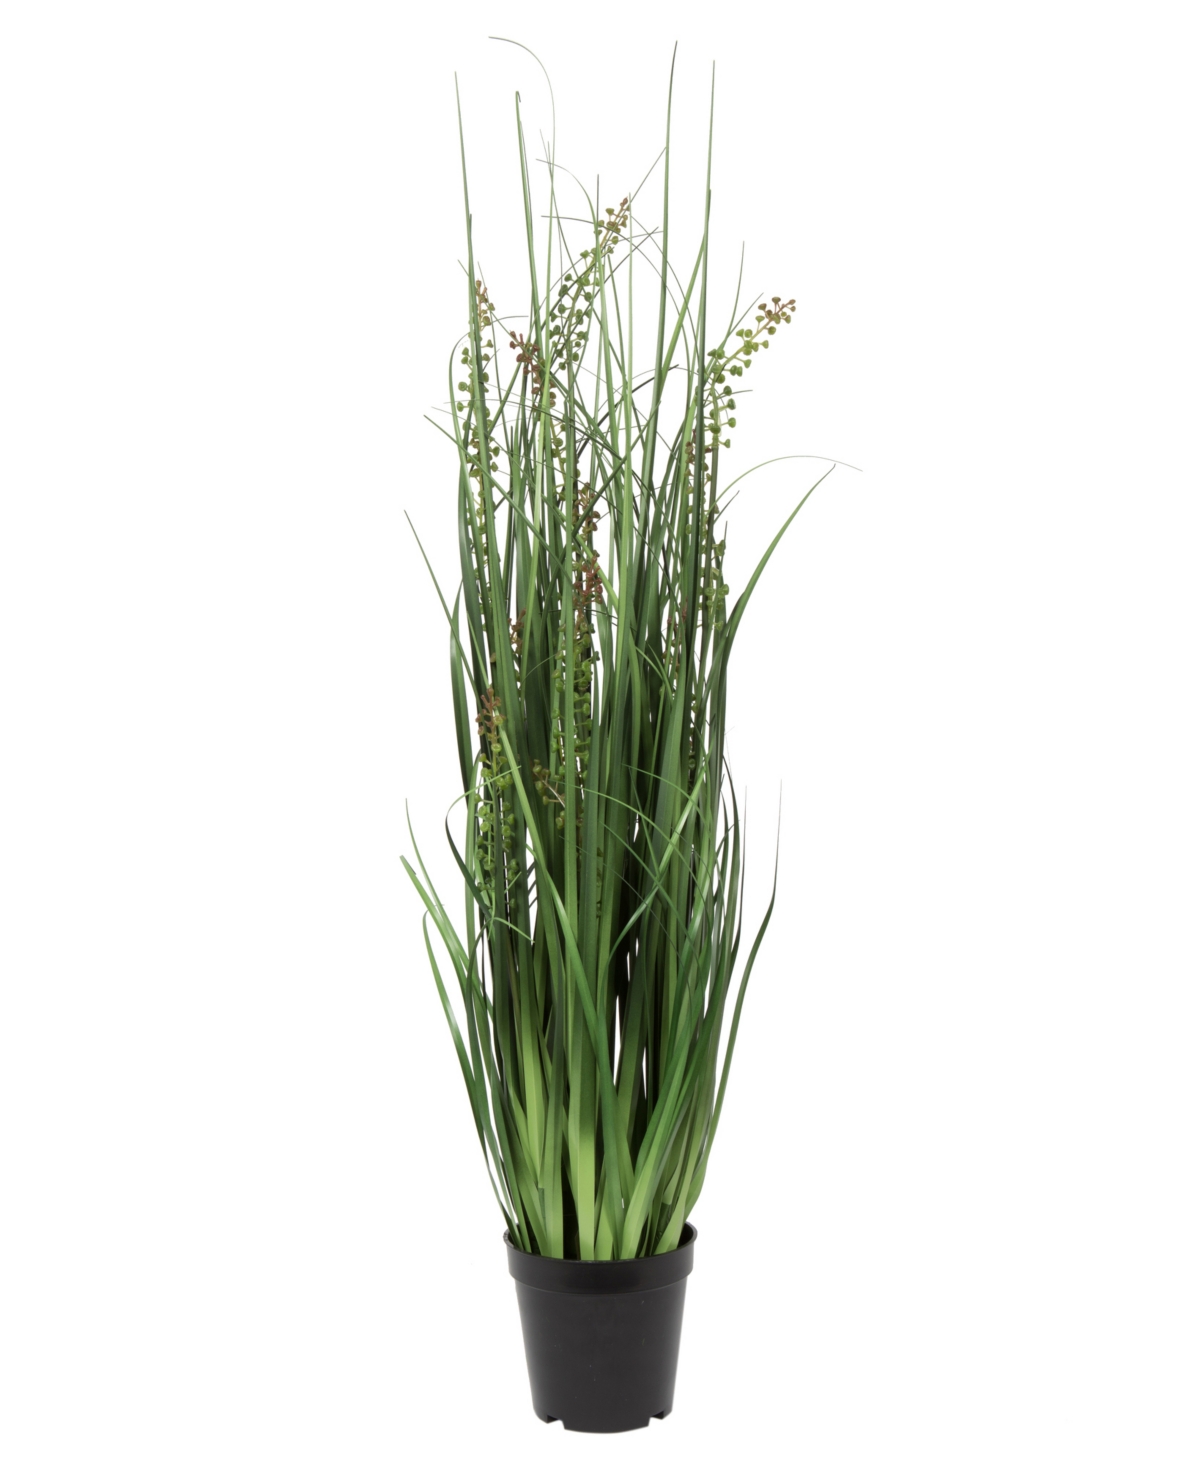 Vickerman 36" Pvc Artificial Potted Green Sheep's Grass And Plastic Grass In No Color